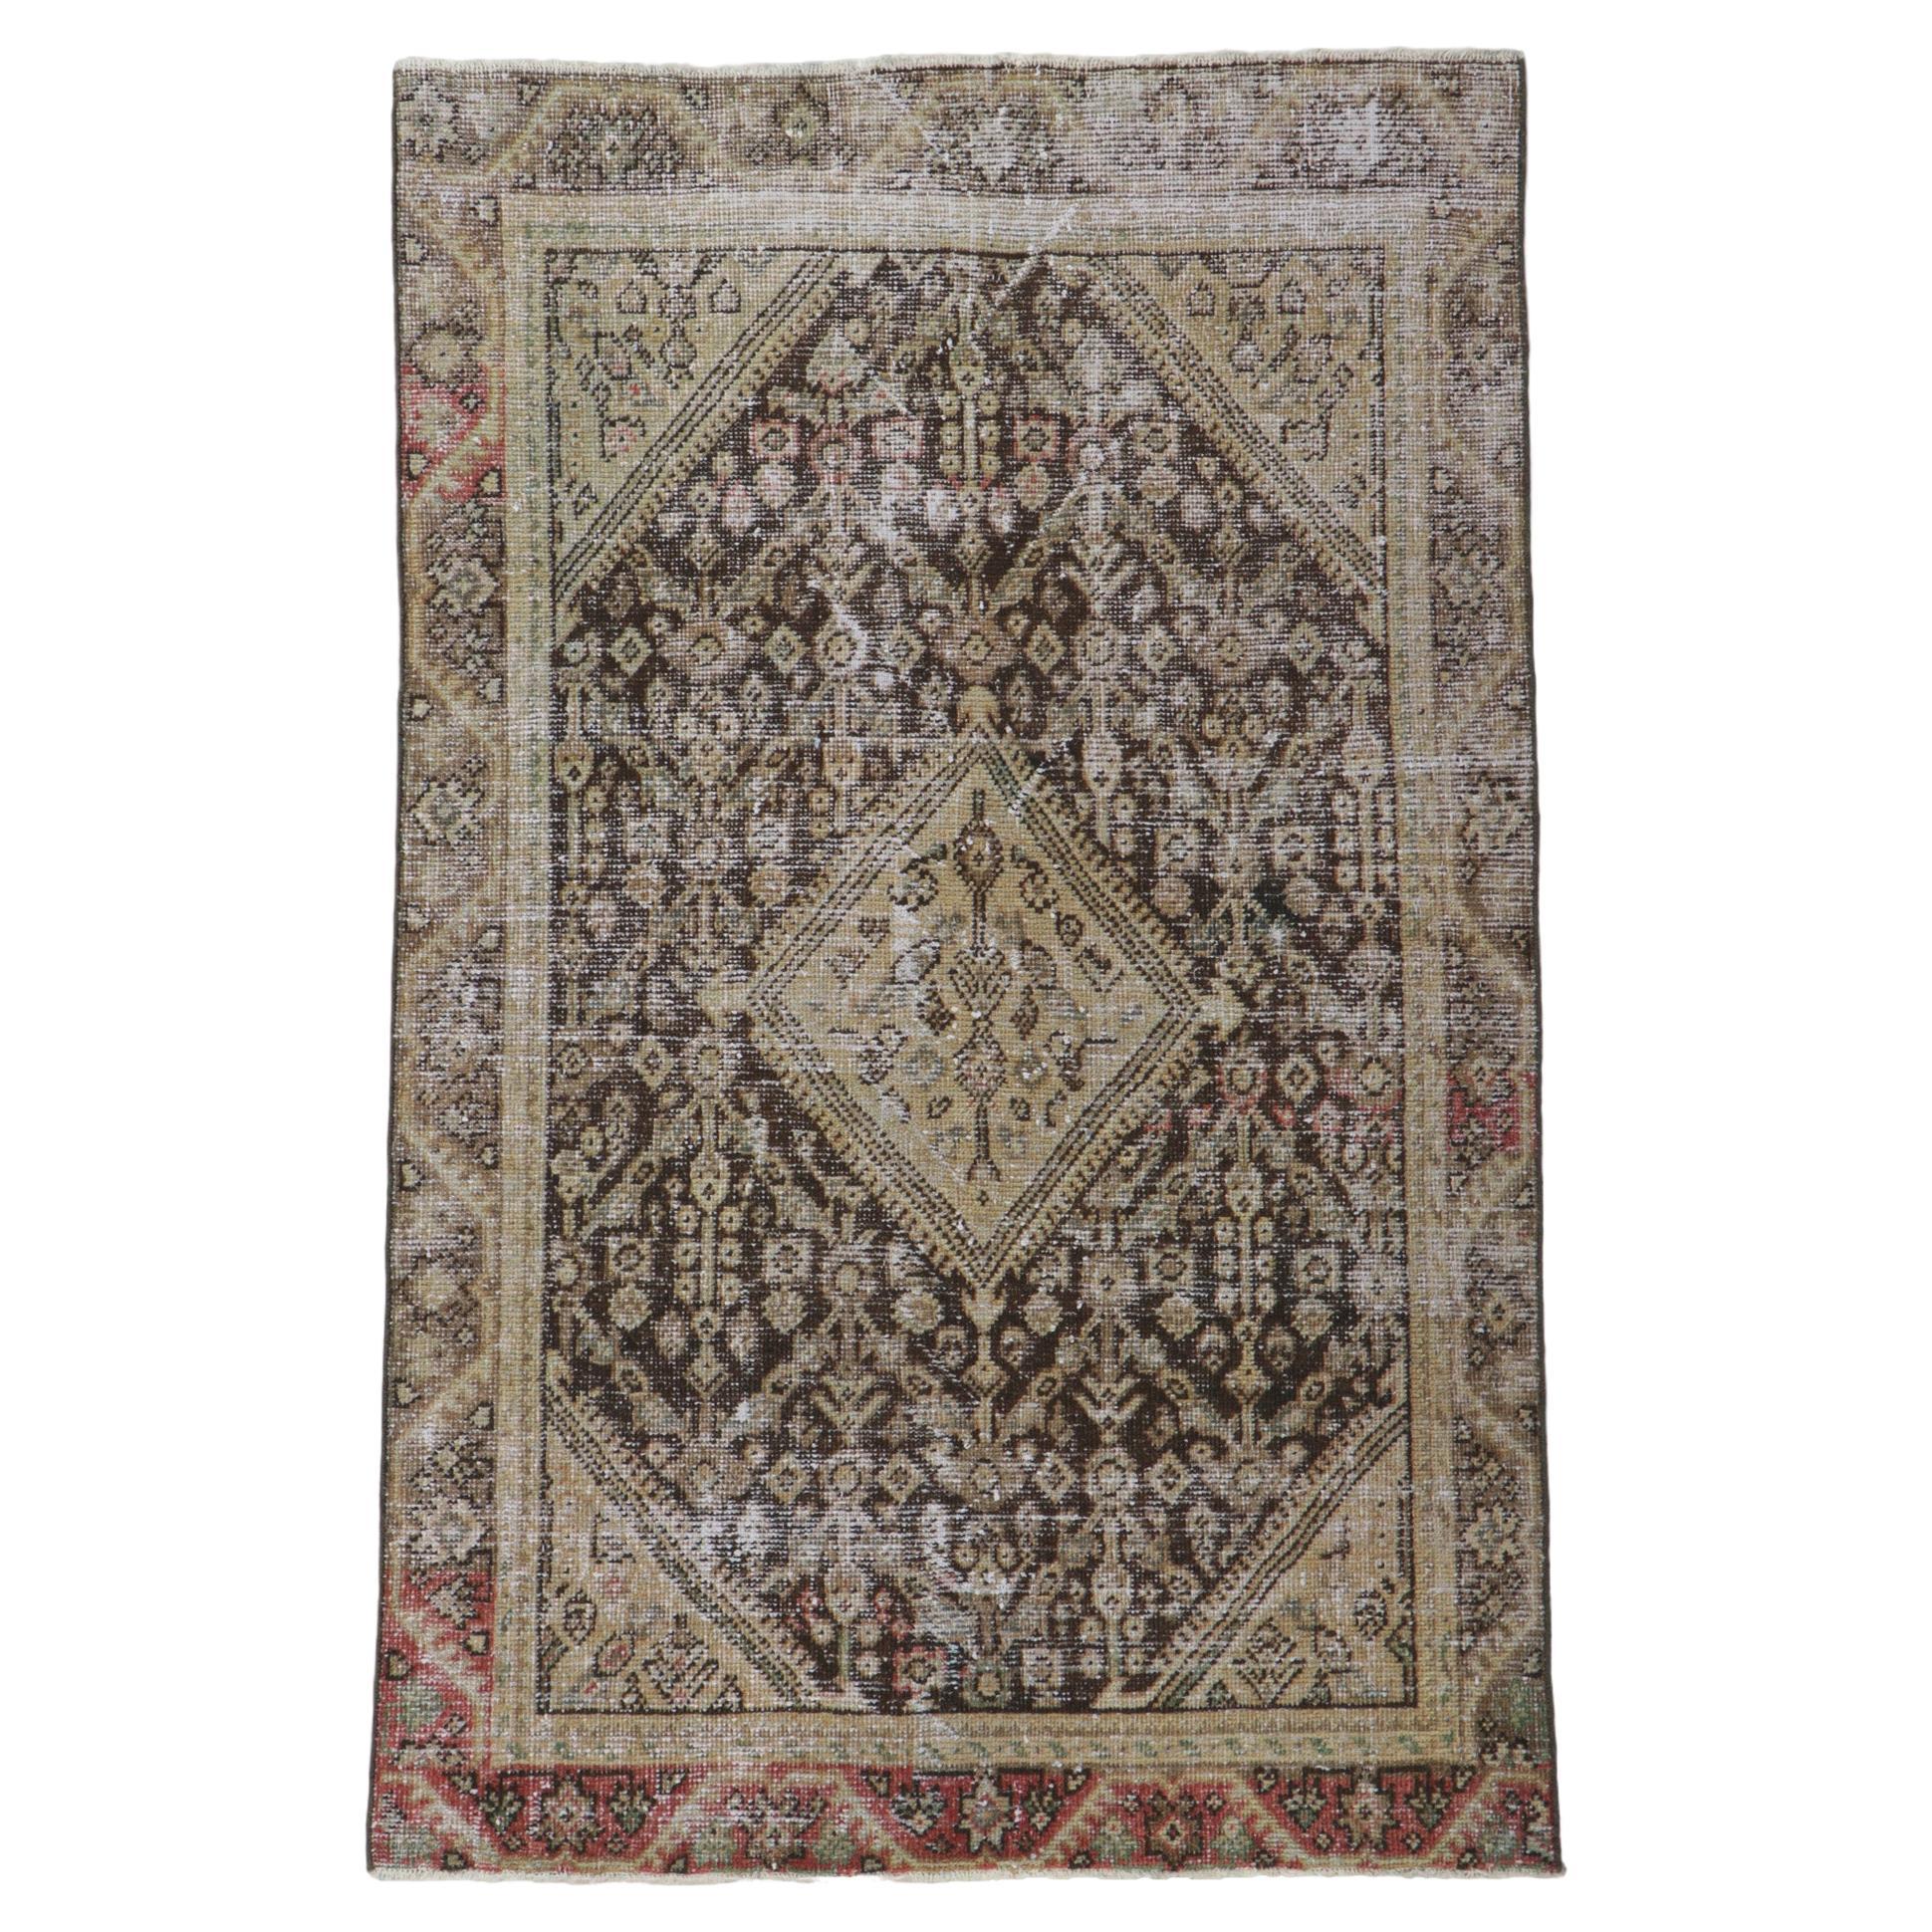 Antique-Worn Persian Mahal Rug, Relaxed Refinement Meets Rugged Beauty For Sale